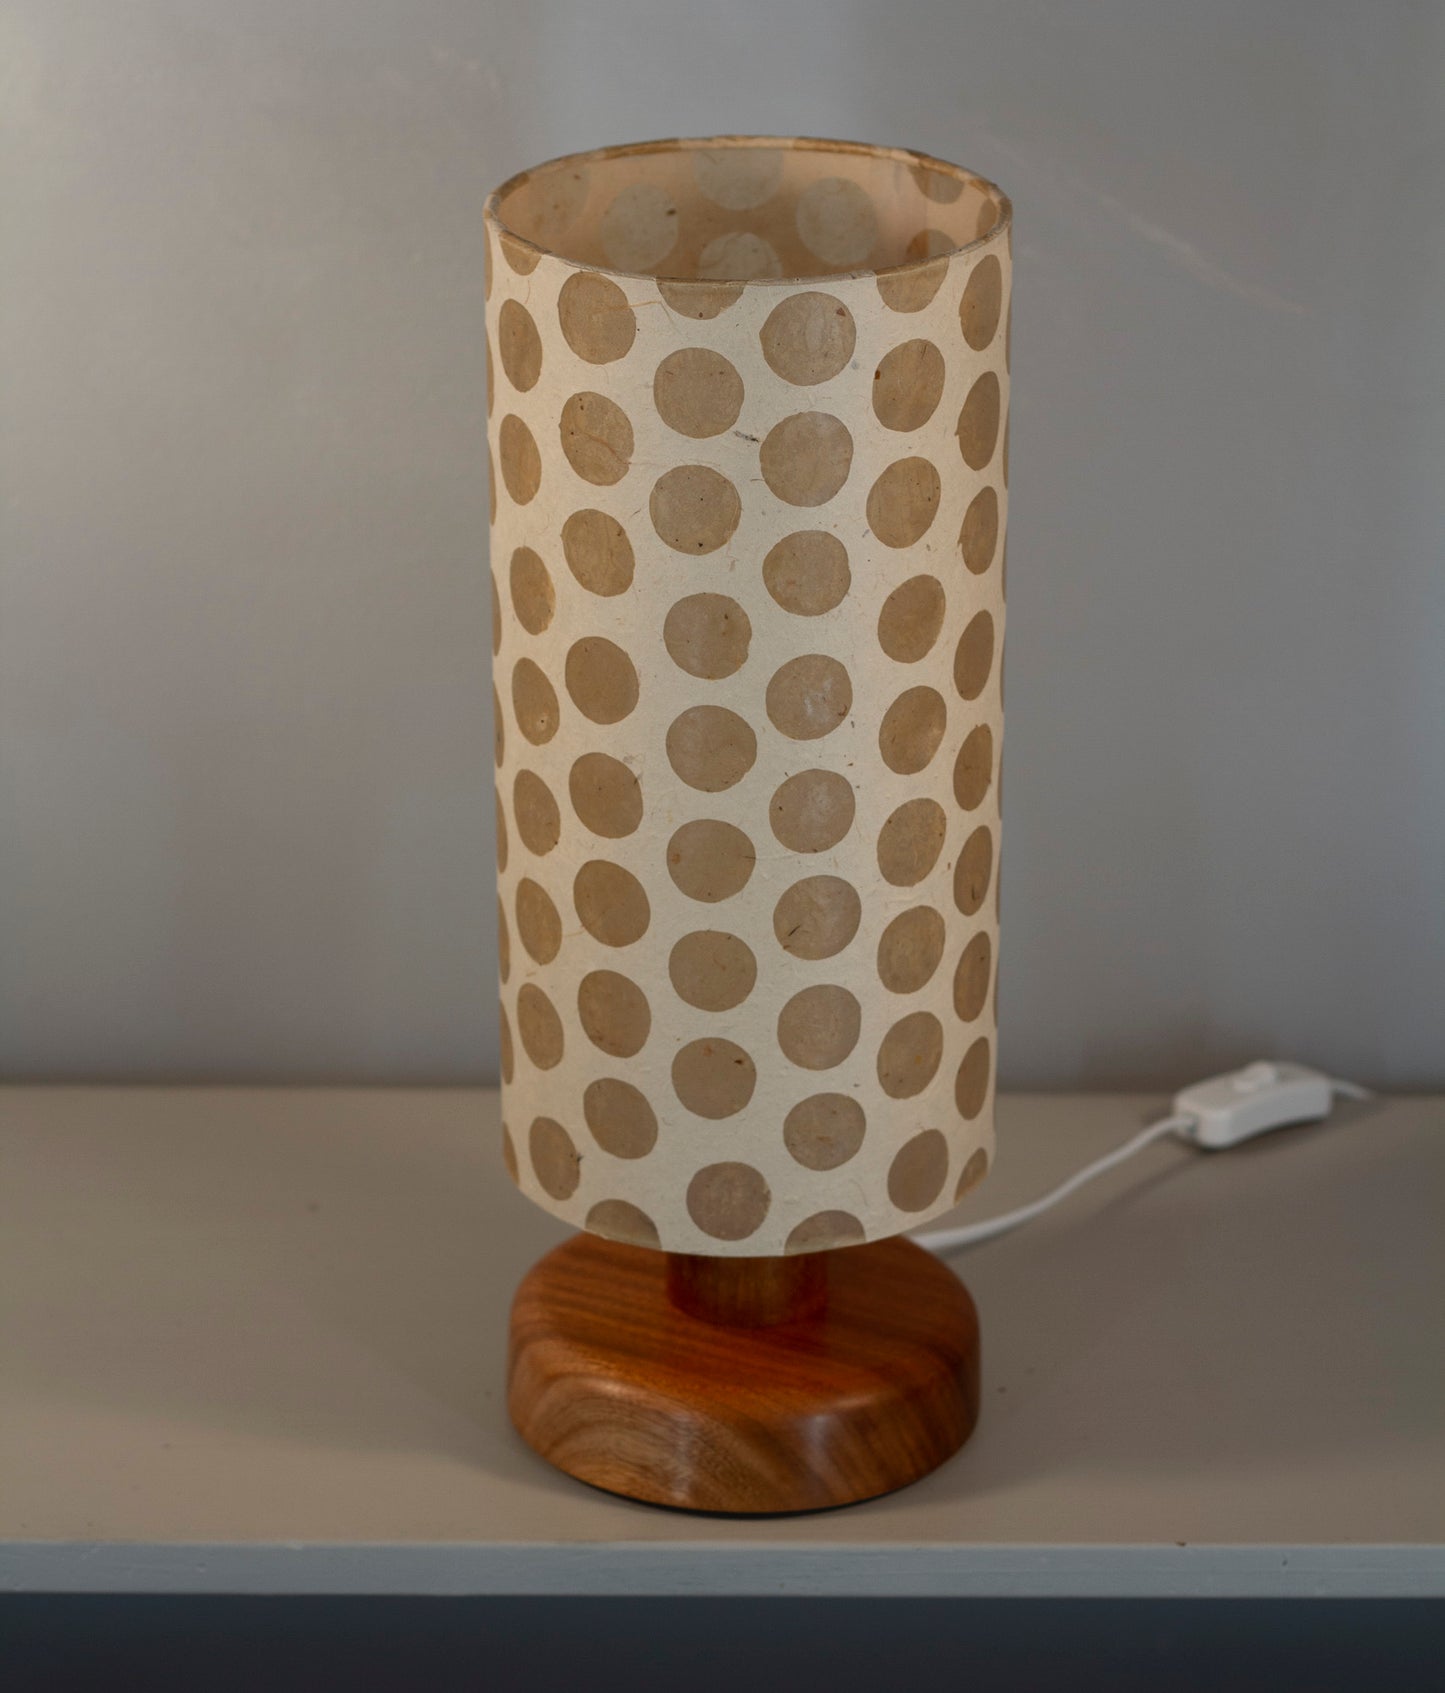 Round Sapele Table Lamp with 15cm x 30cm Lampshade in P85 ~ Batik Dots on Natural